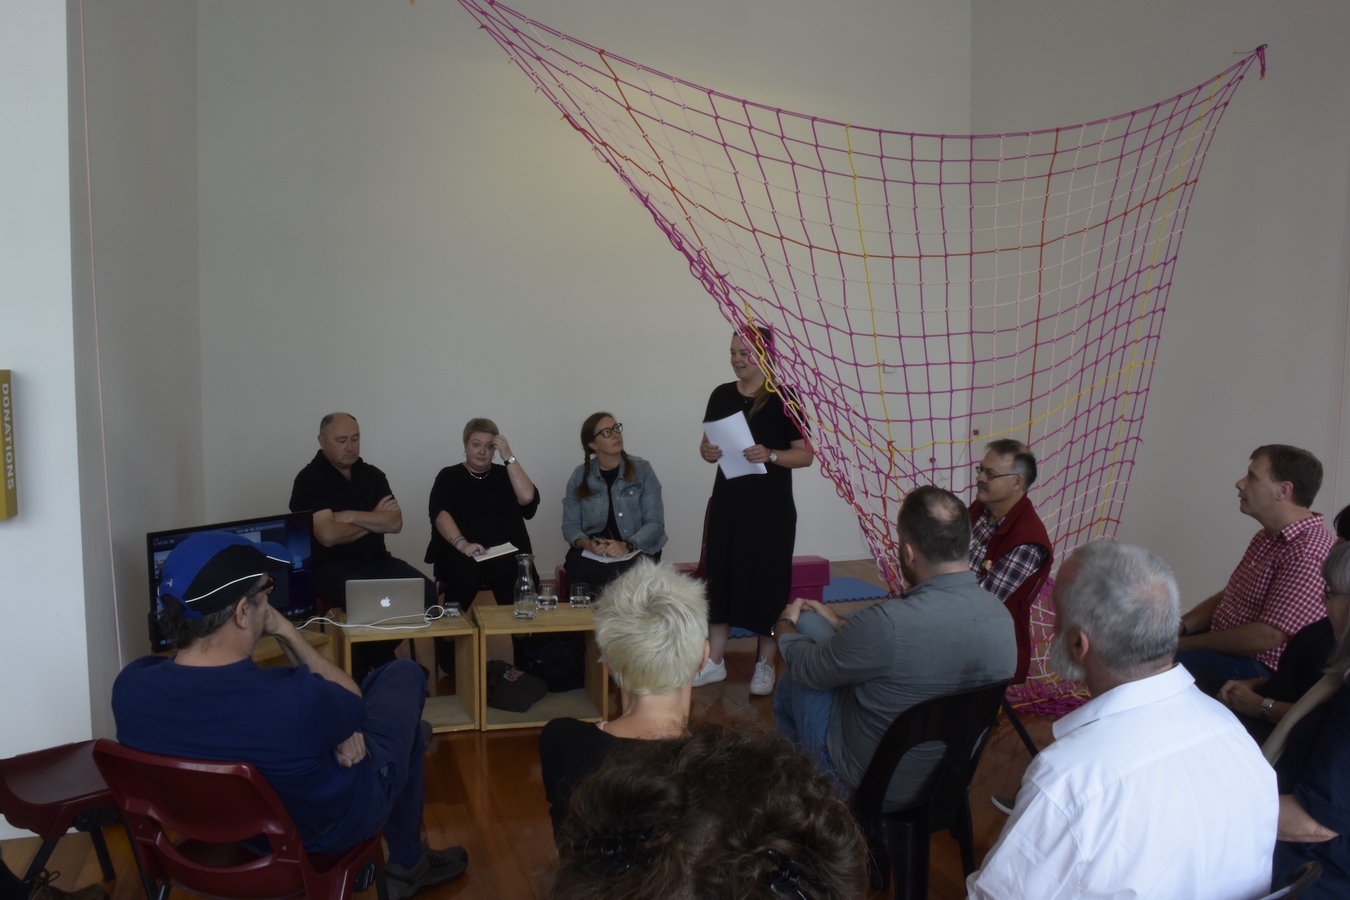 Panel discussion: After the exhibition, the lifespan of an artwork, 12 noon–1pm, Saturday 30 March. Doc Ross, Louise Palmer, and Miranda Parkes; chaired by Hope Wilson.